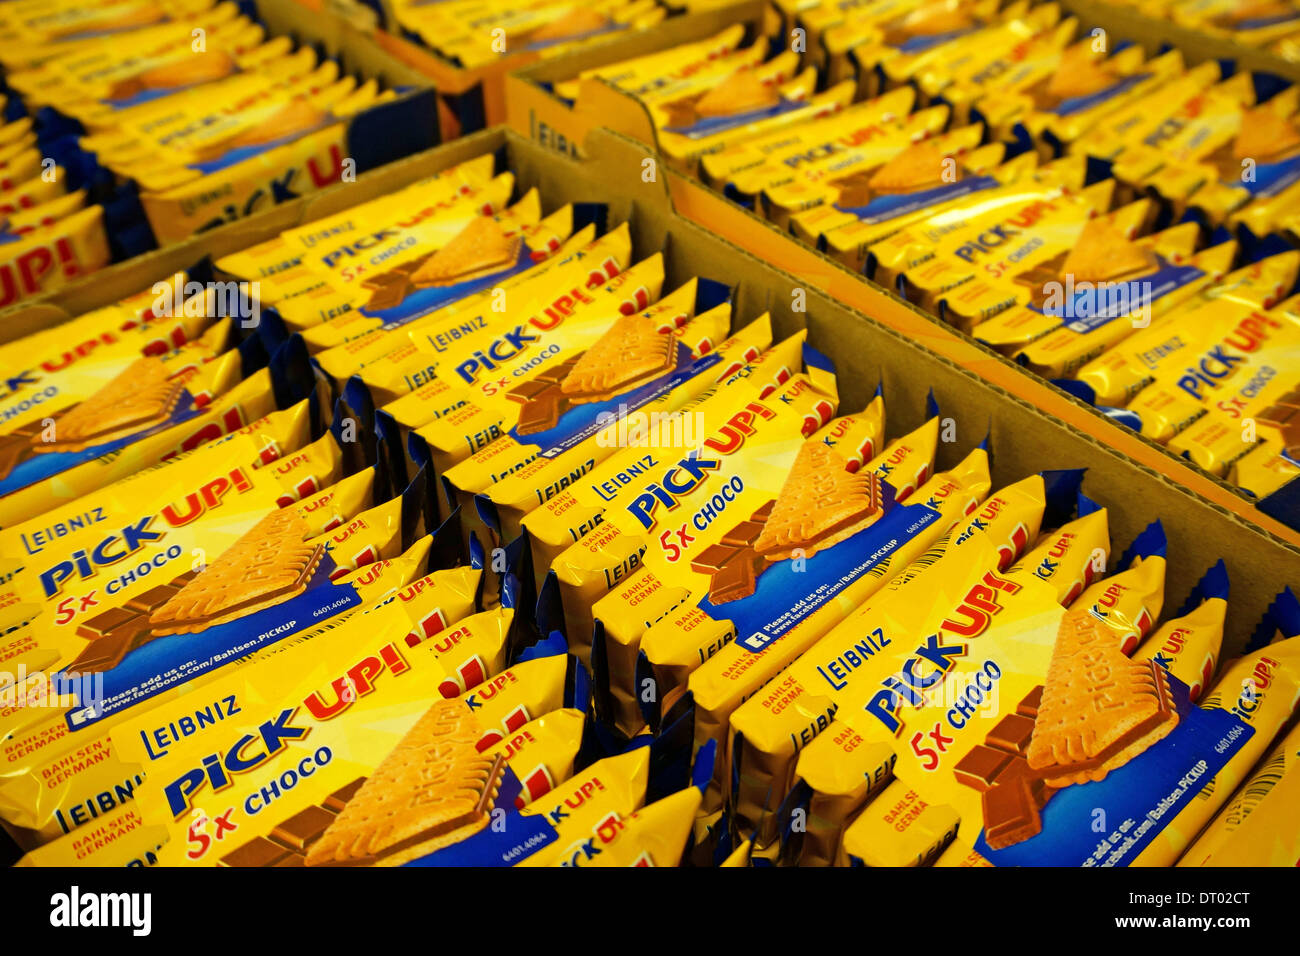 Germany: Leibniz PICK UP-biscuits from Bahlsen Stock Photo